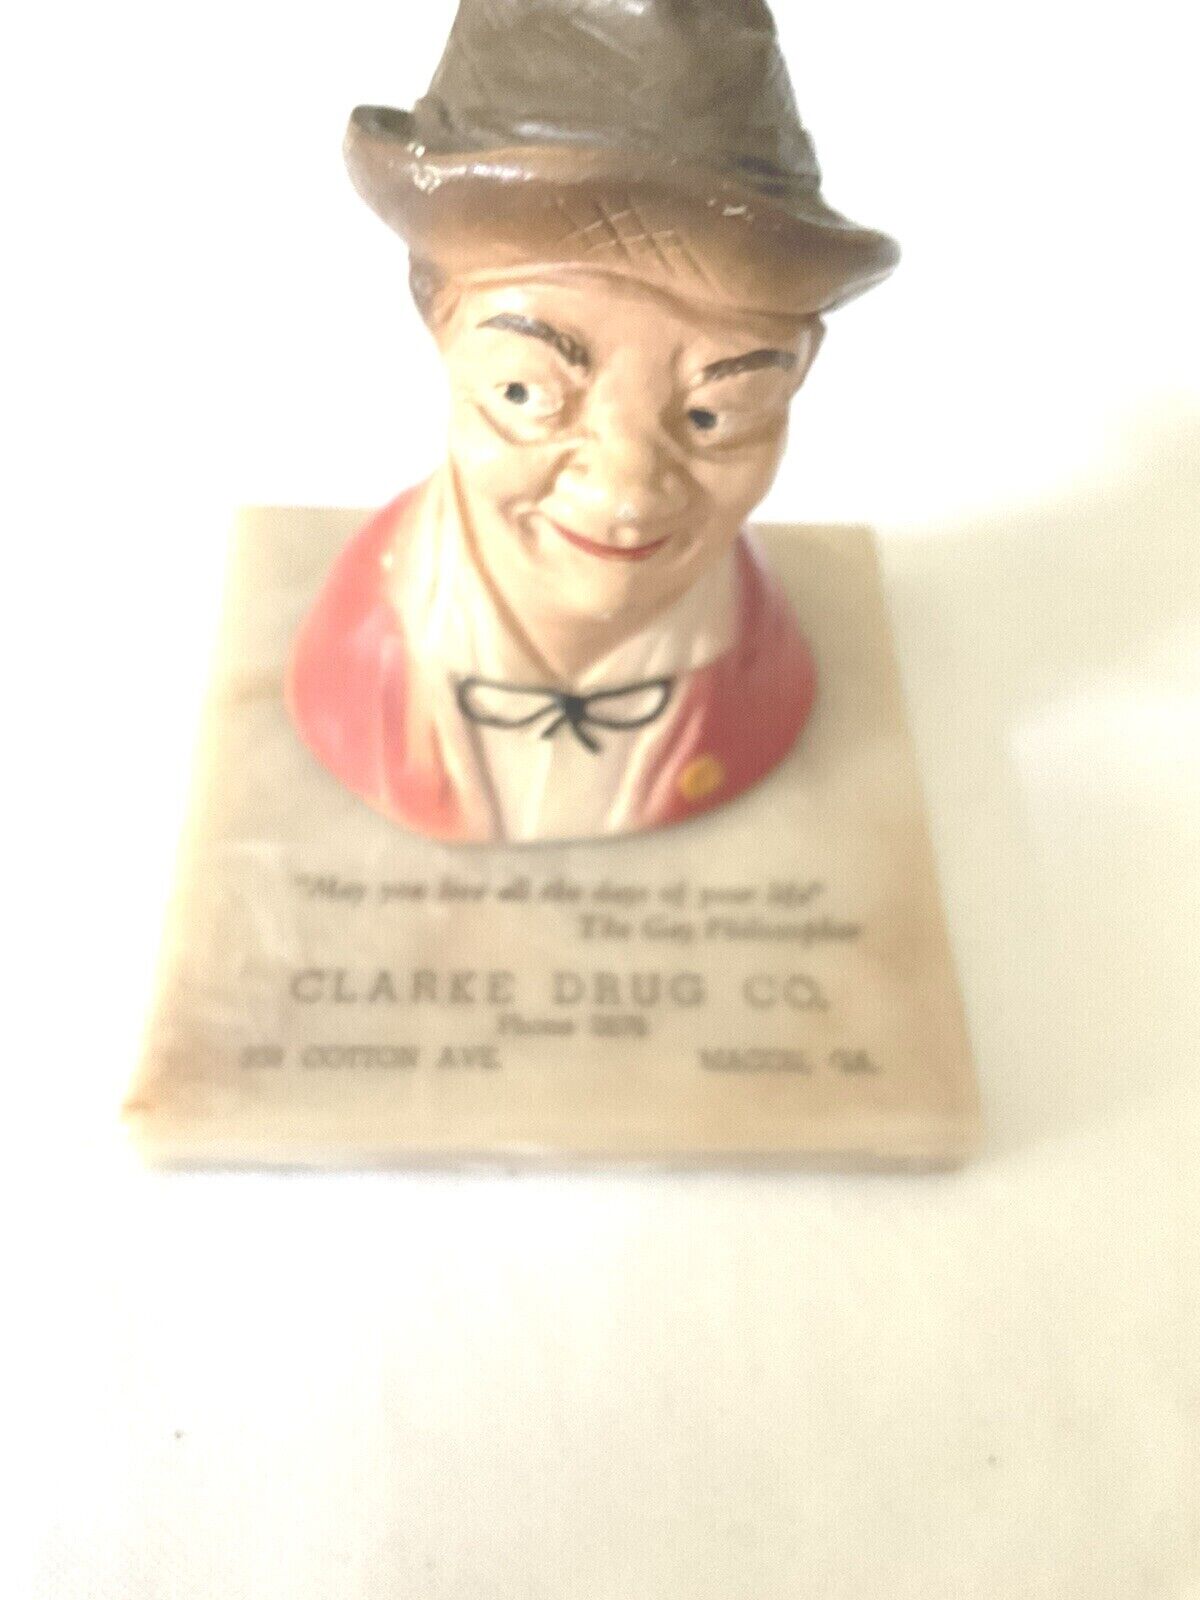 The Gay Philosopher Paperweight By Henry Major Advertising Clark Drug Co Chipped